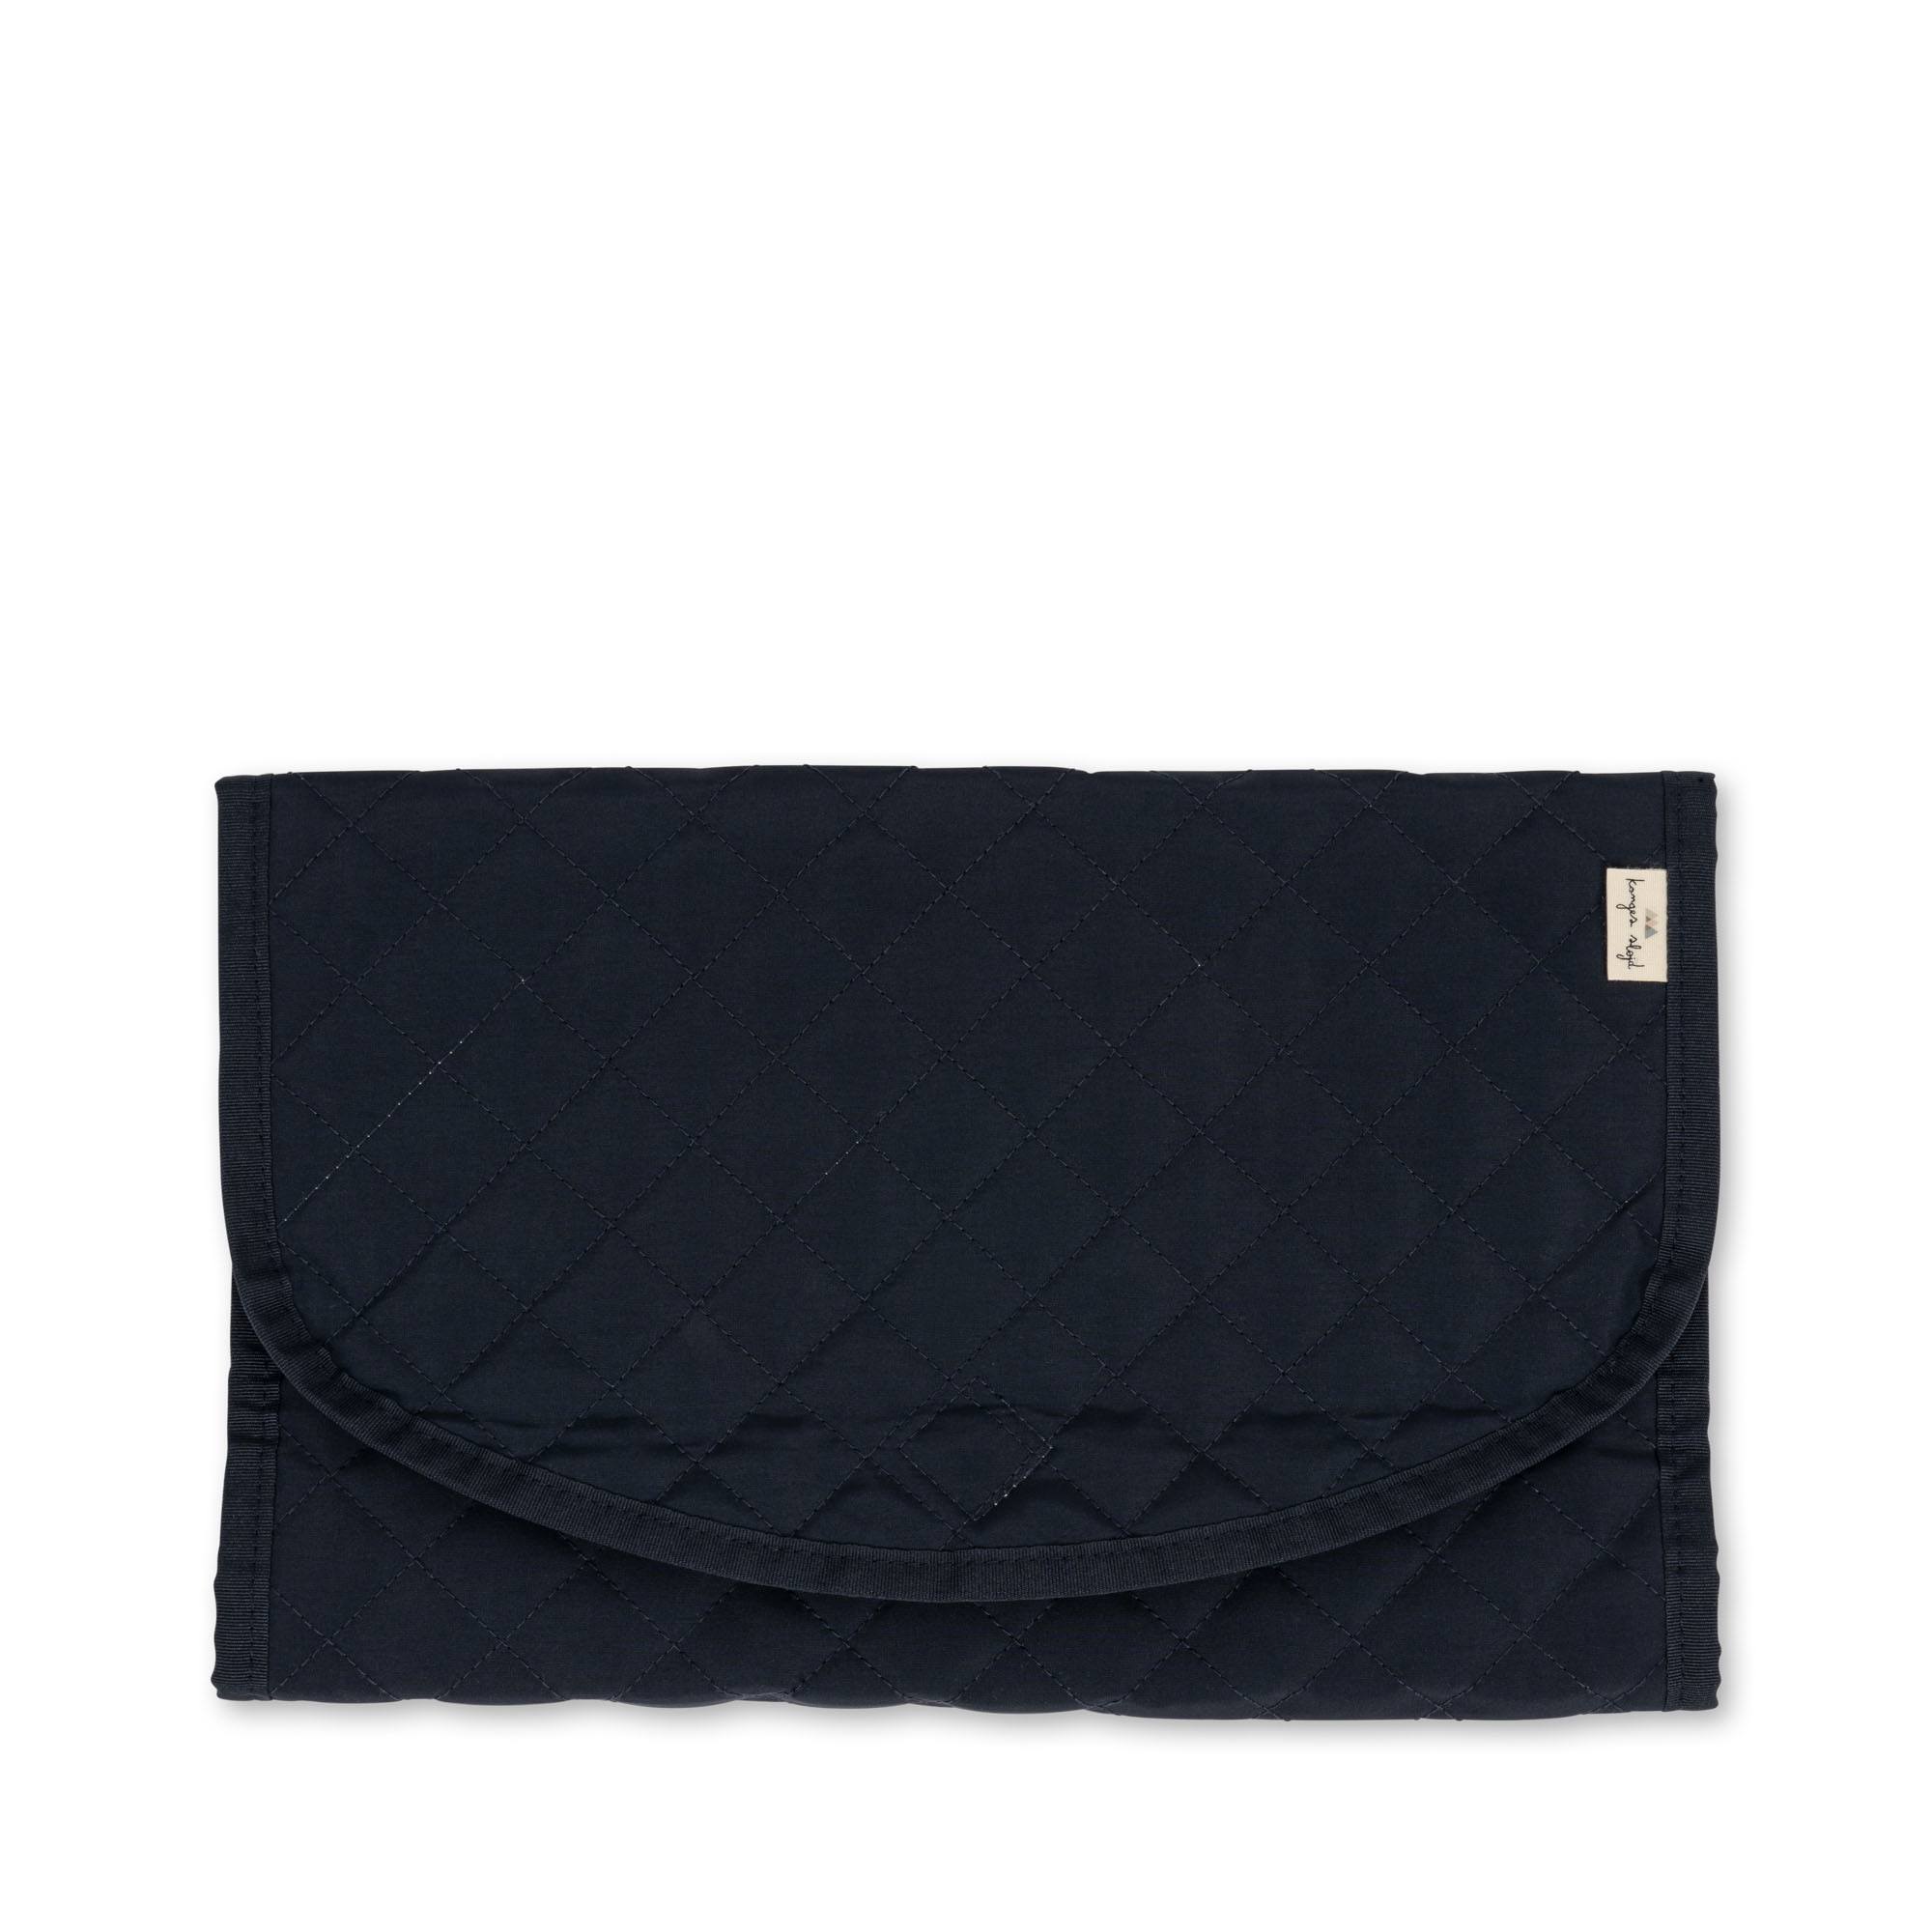 Konges Sløjd A/S ALL YOU NEED BAG Changing bags NAVY